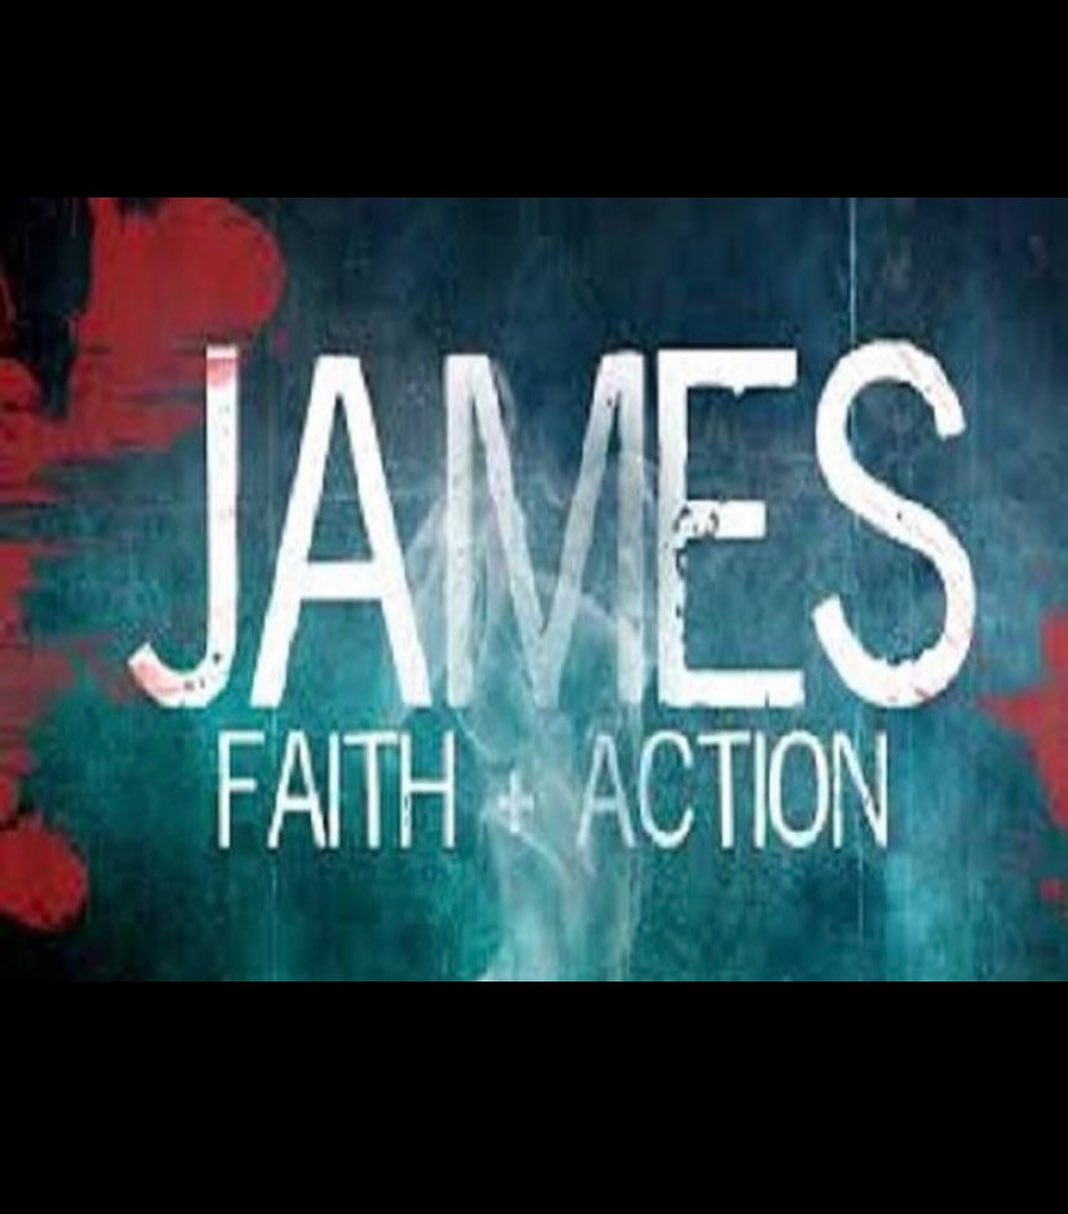 Last Sunday, we began a dialogue about the current state of the American church and how the book of James is SO TIMELY [...]
</p>
</body></html>